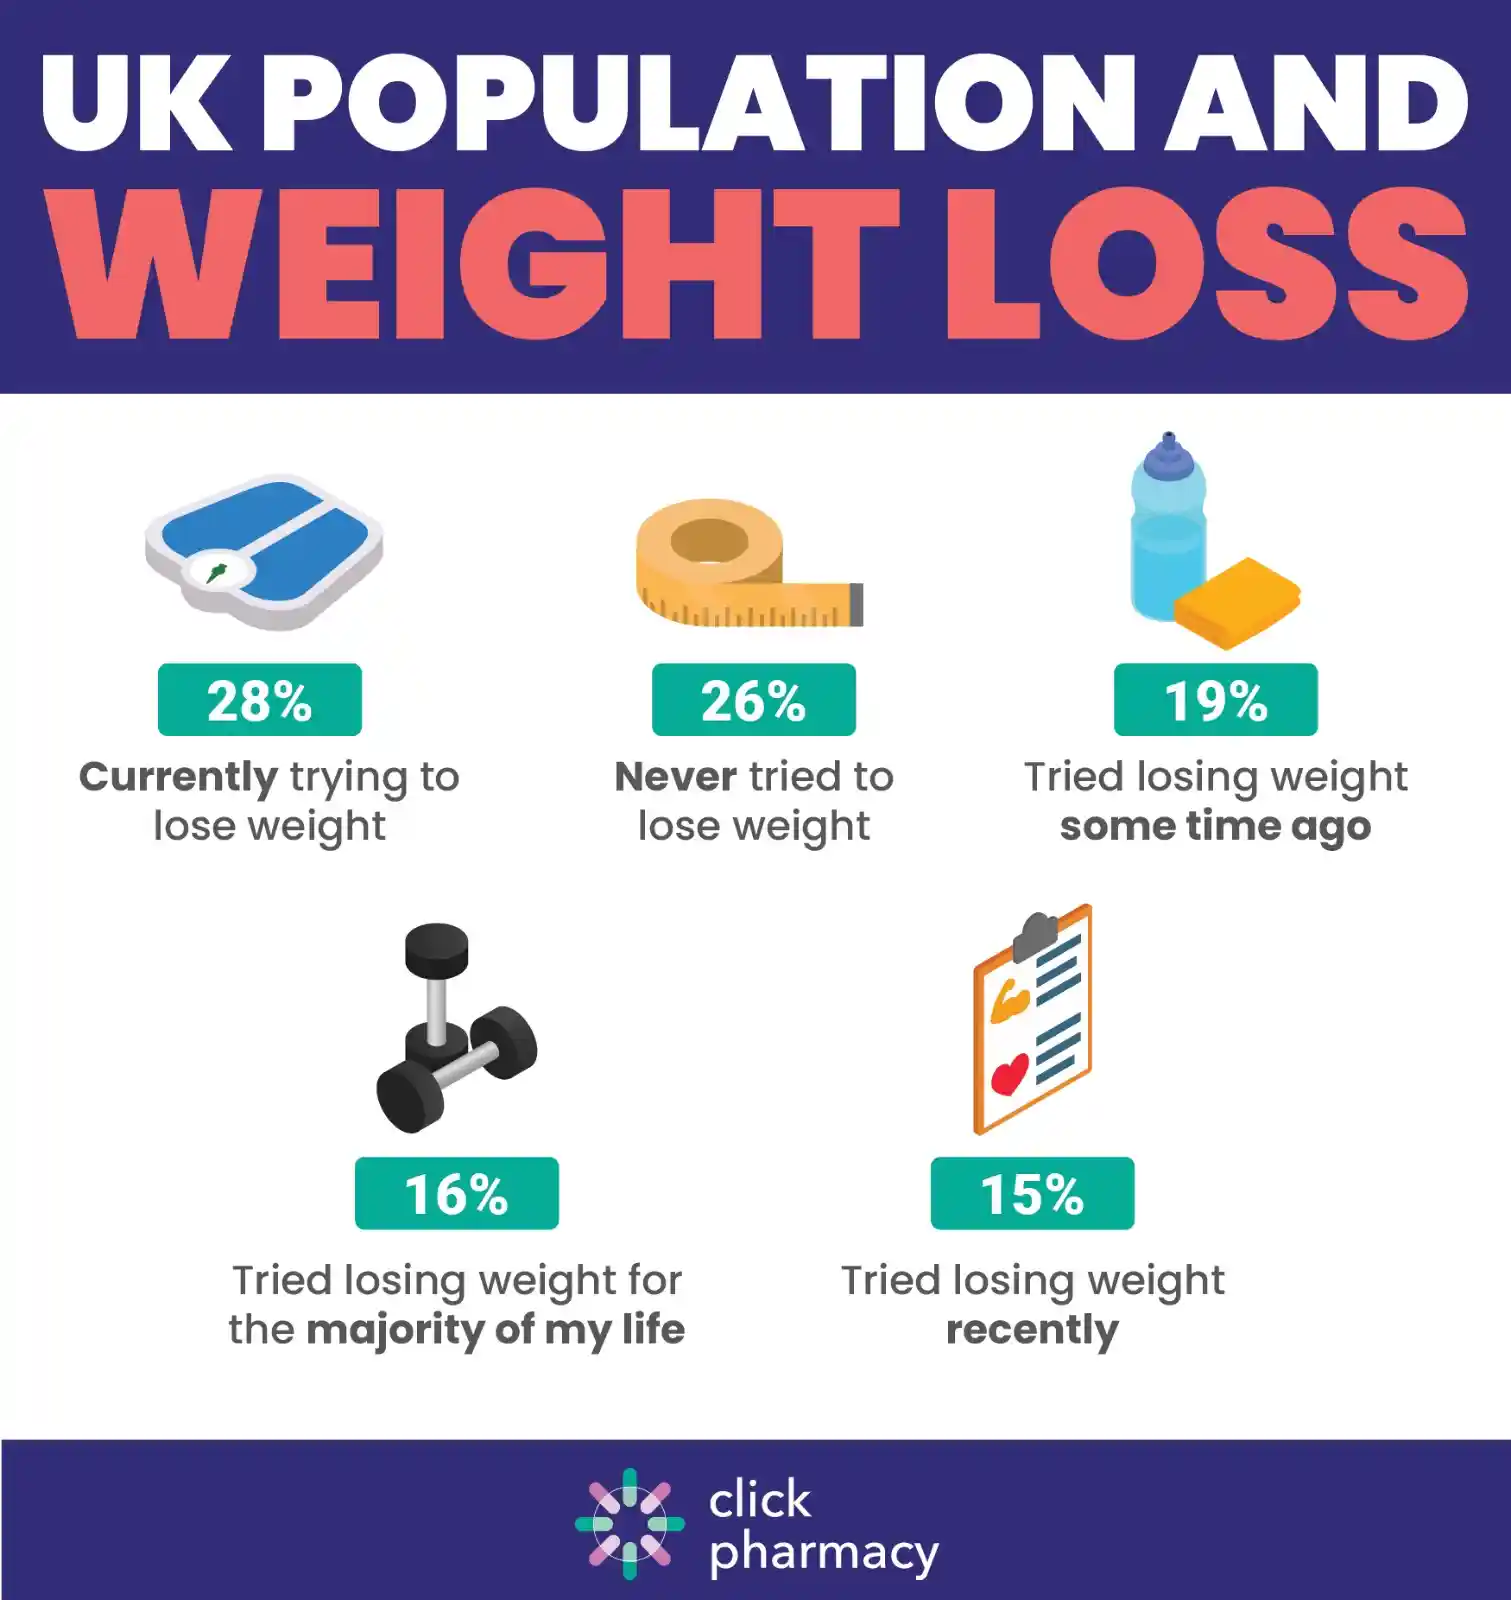 UK population and weight loss